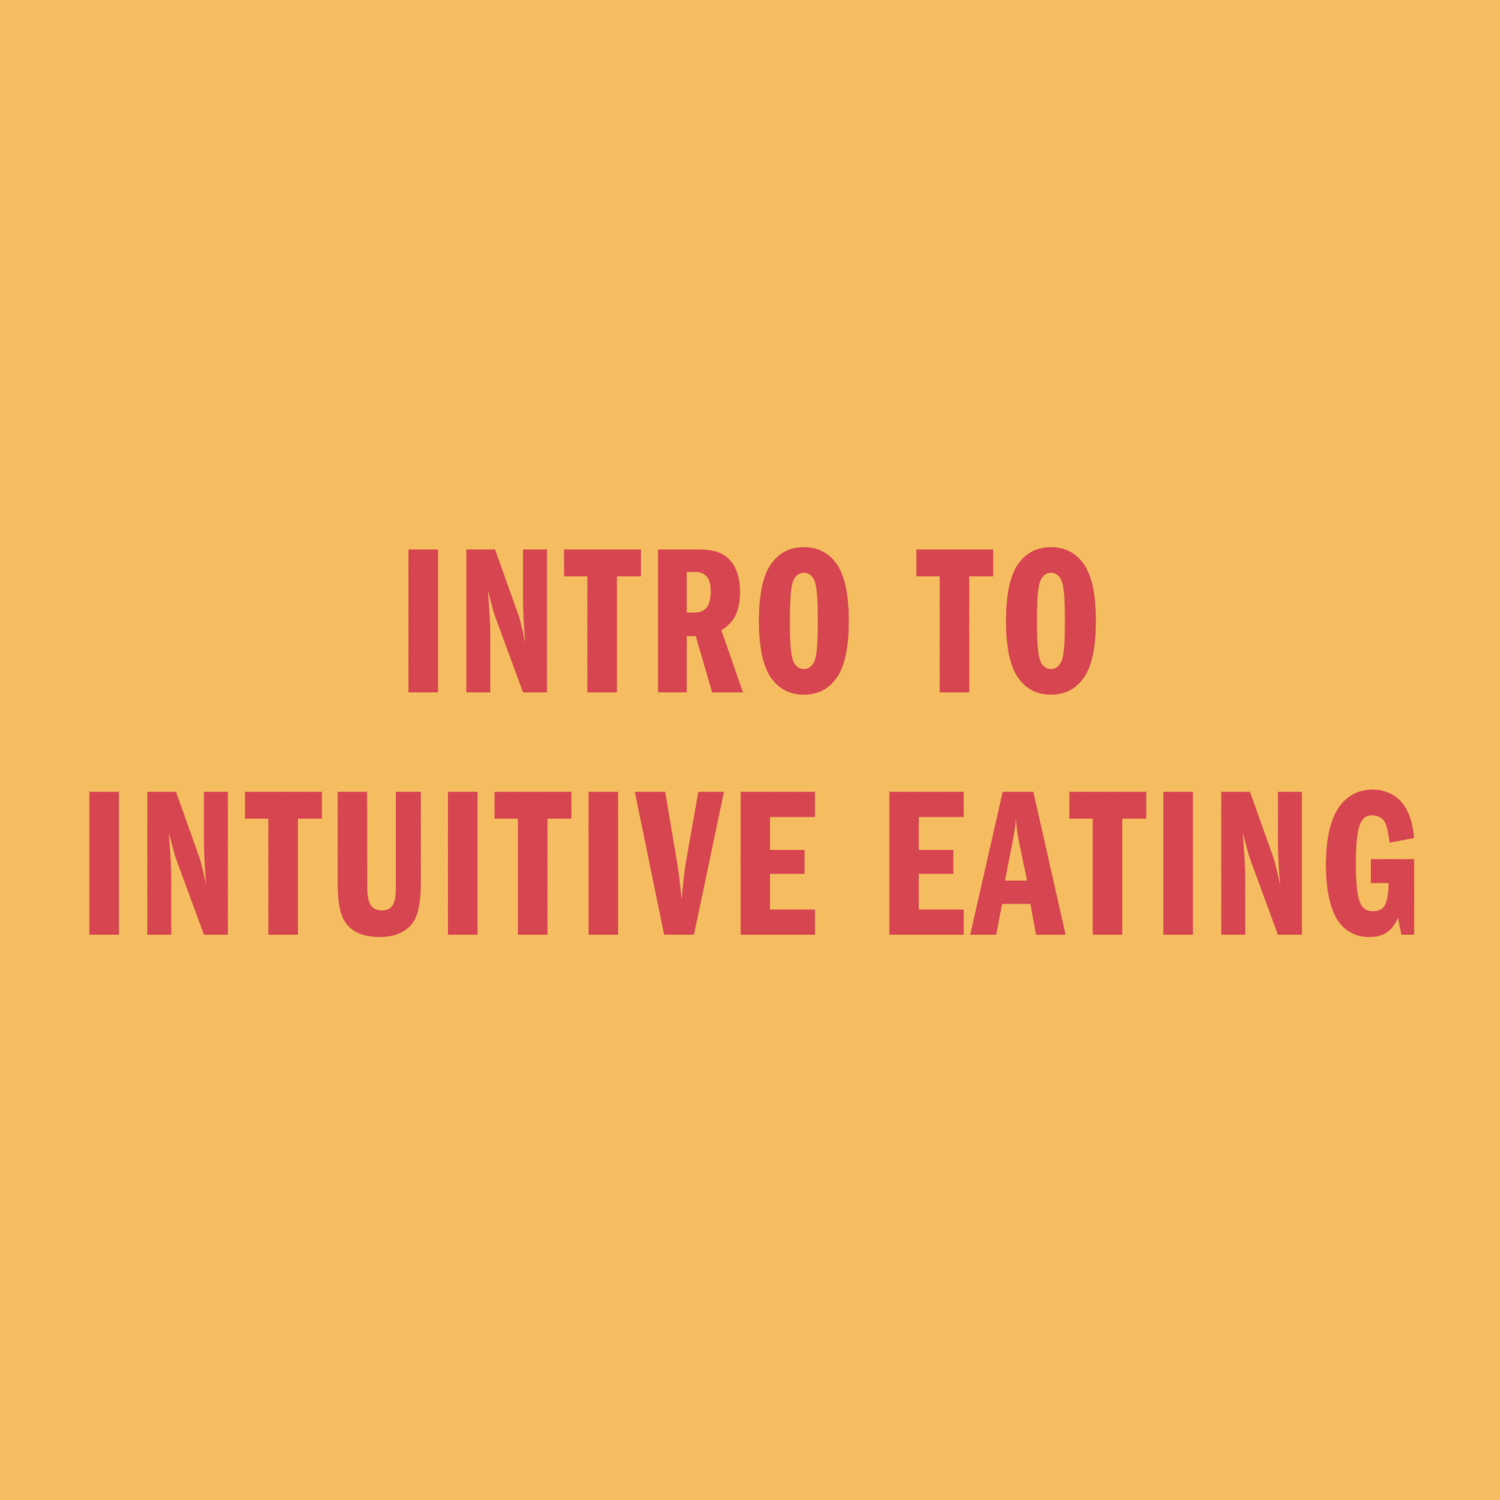 Intro to Intuitive Eating